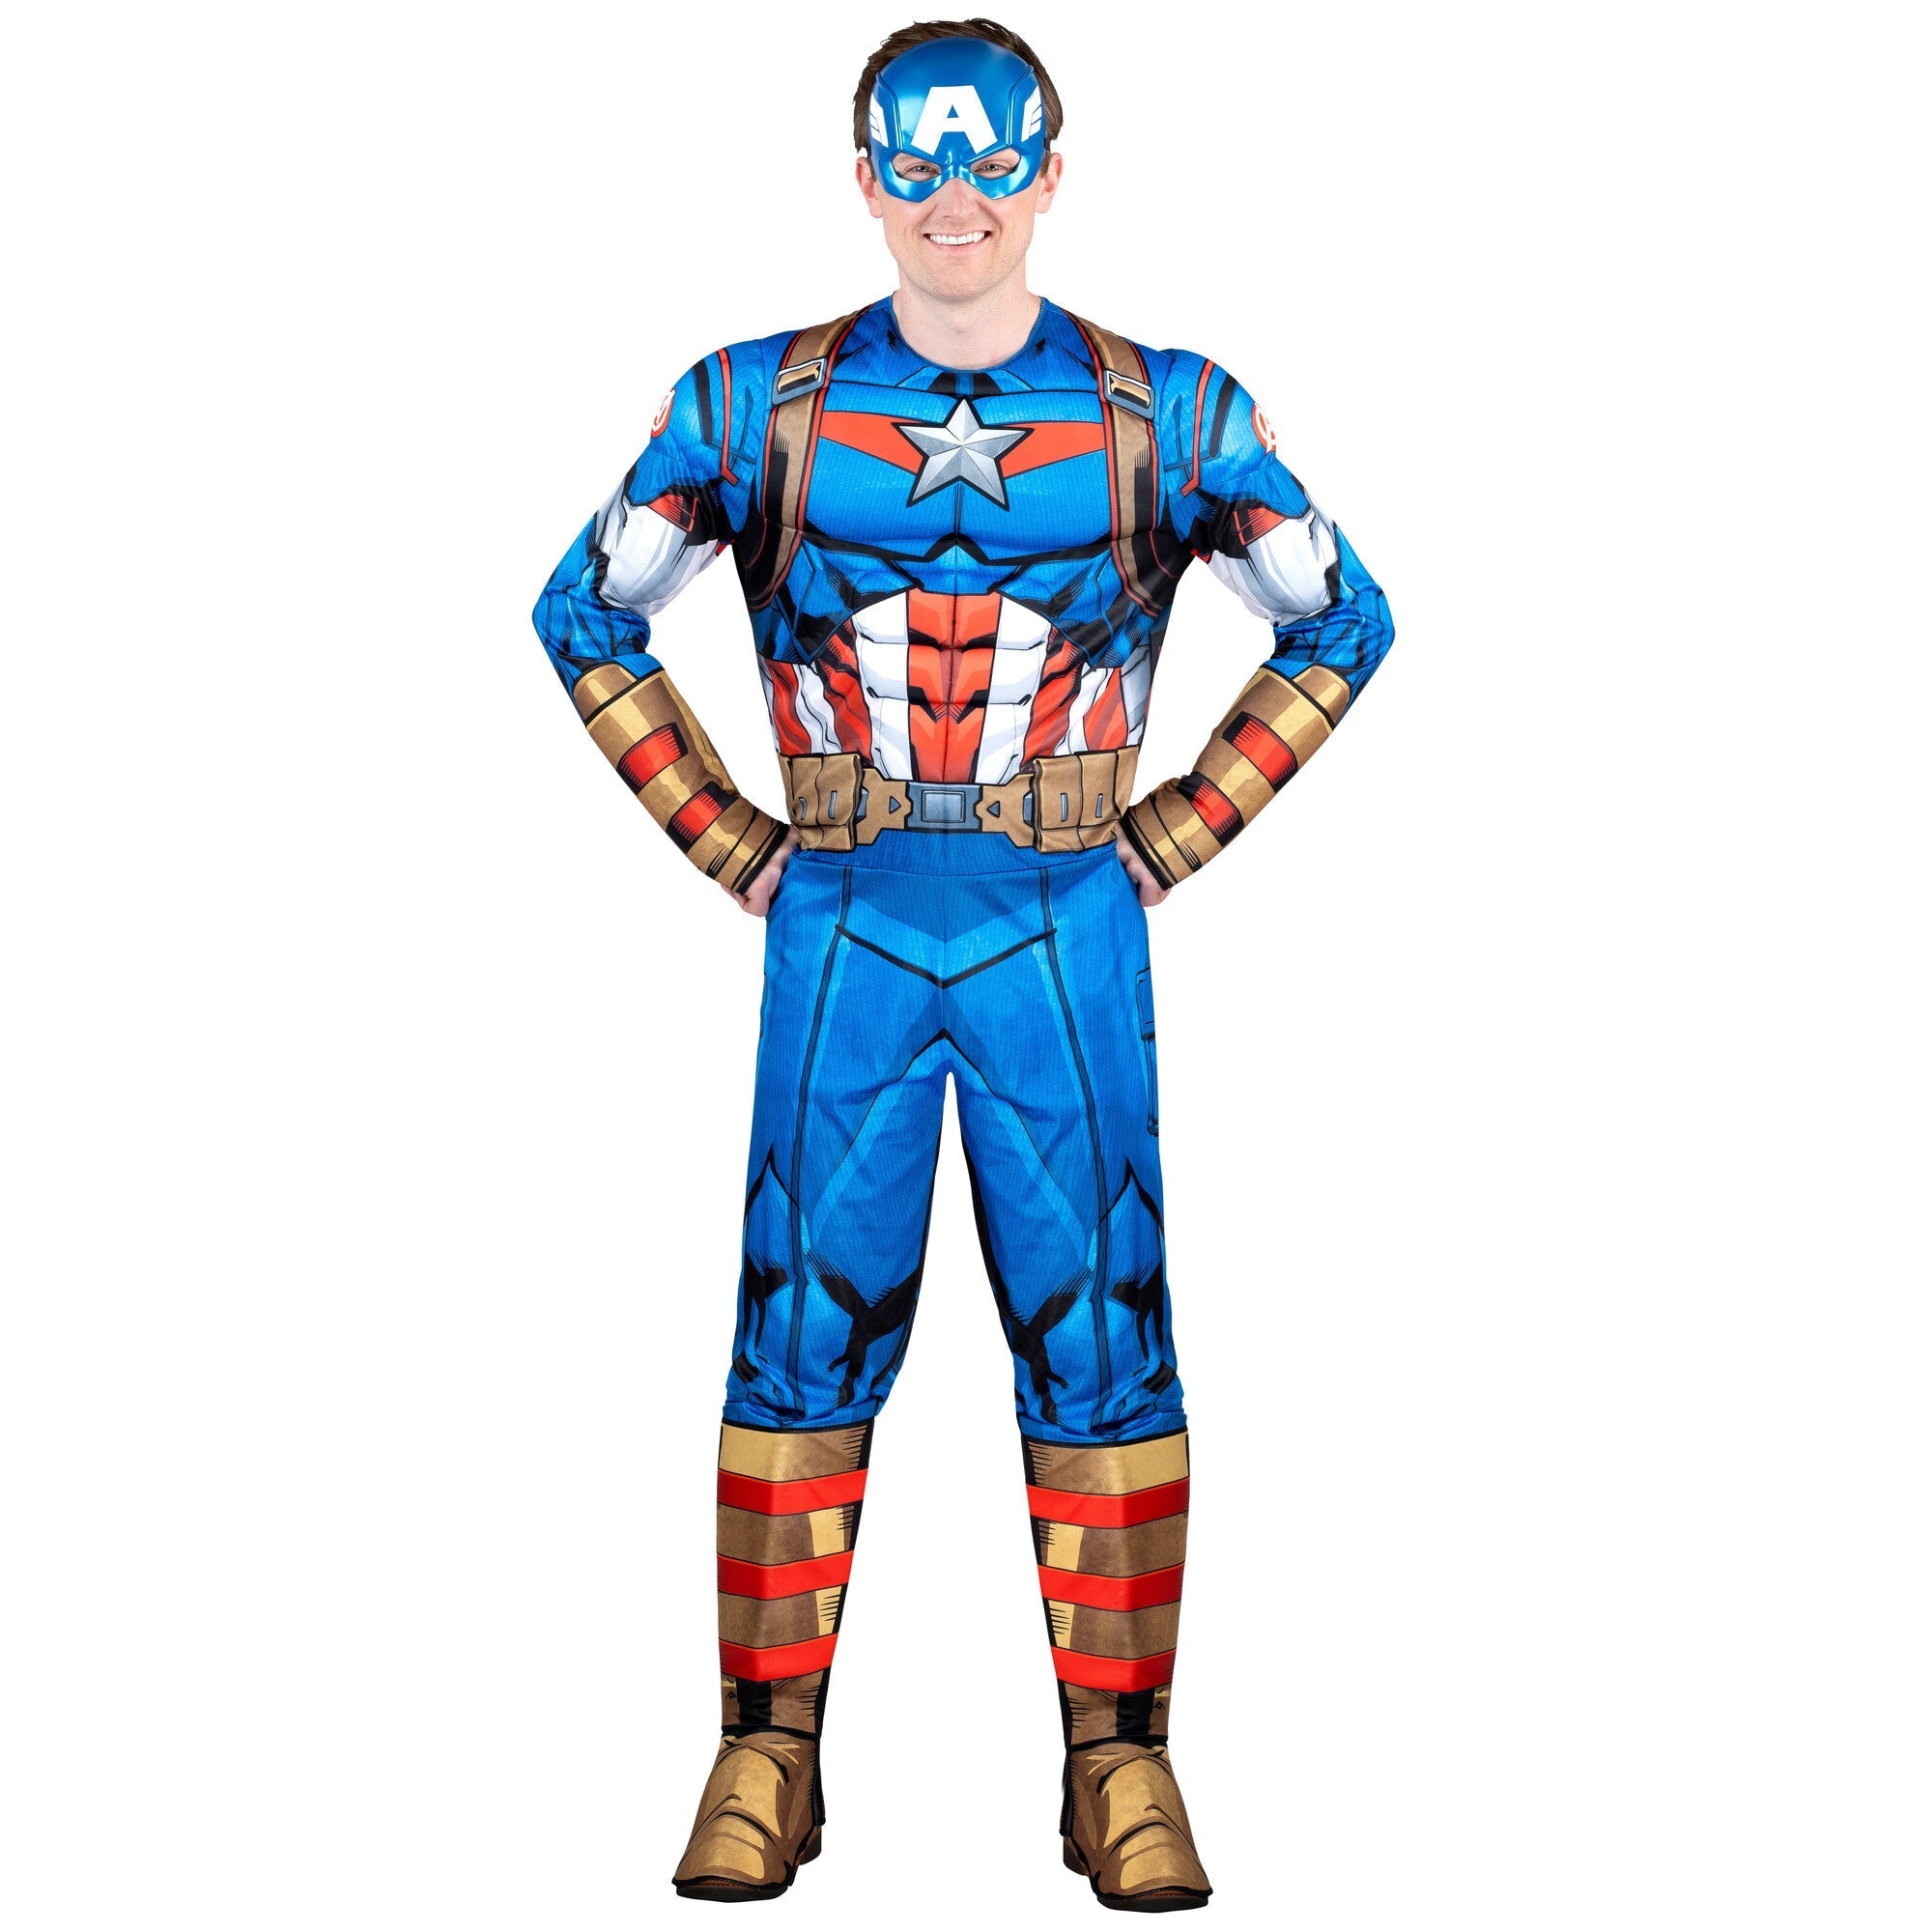 Marvel Captain America Qualux Costume for Adults, Jumpsuit and Mask